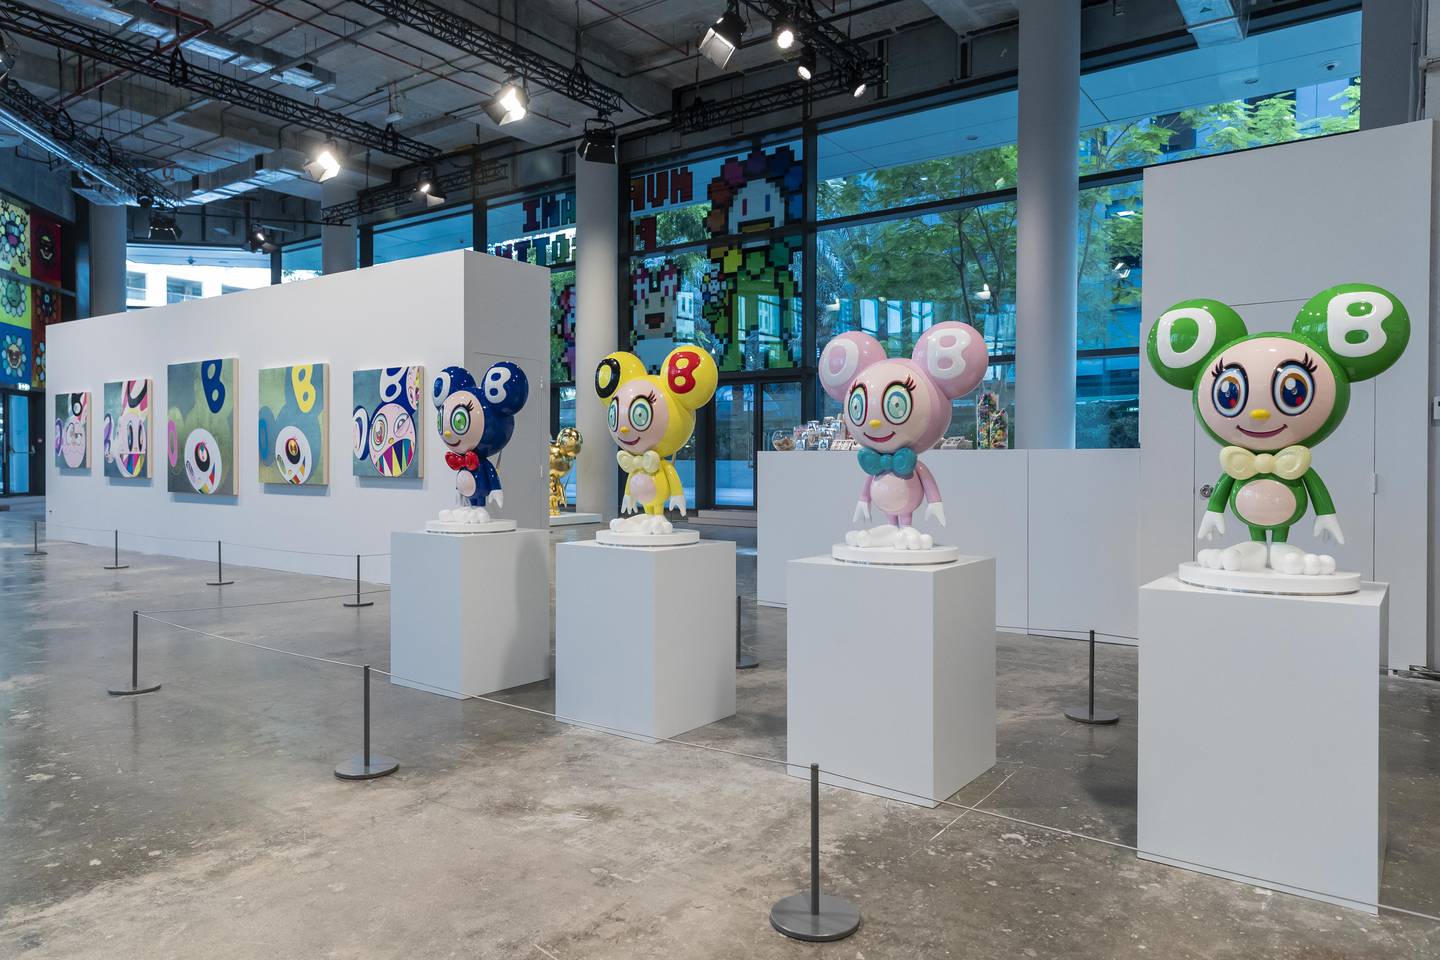 Takashi Murakami says the character Mr DOB began as a 'stupid Japanese pronunciation joke'. The character's left ear forms a D, face an O and right ear a B. Antonie Robertson / The National